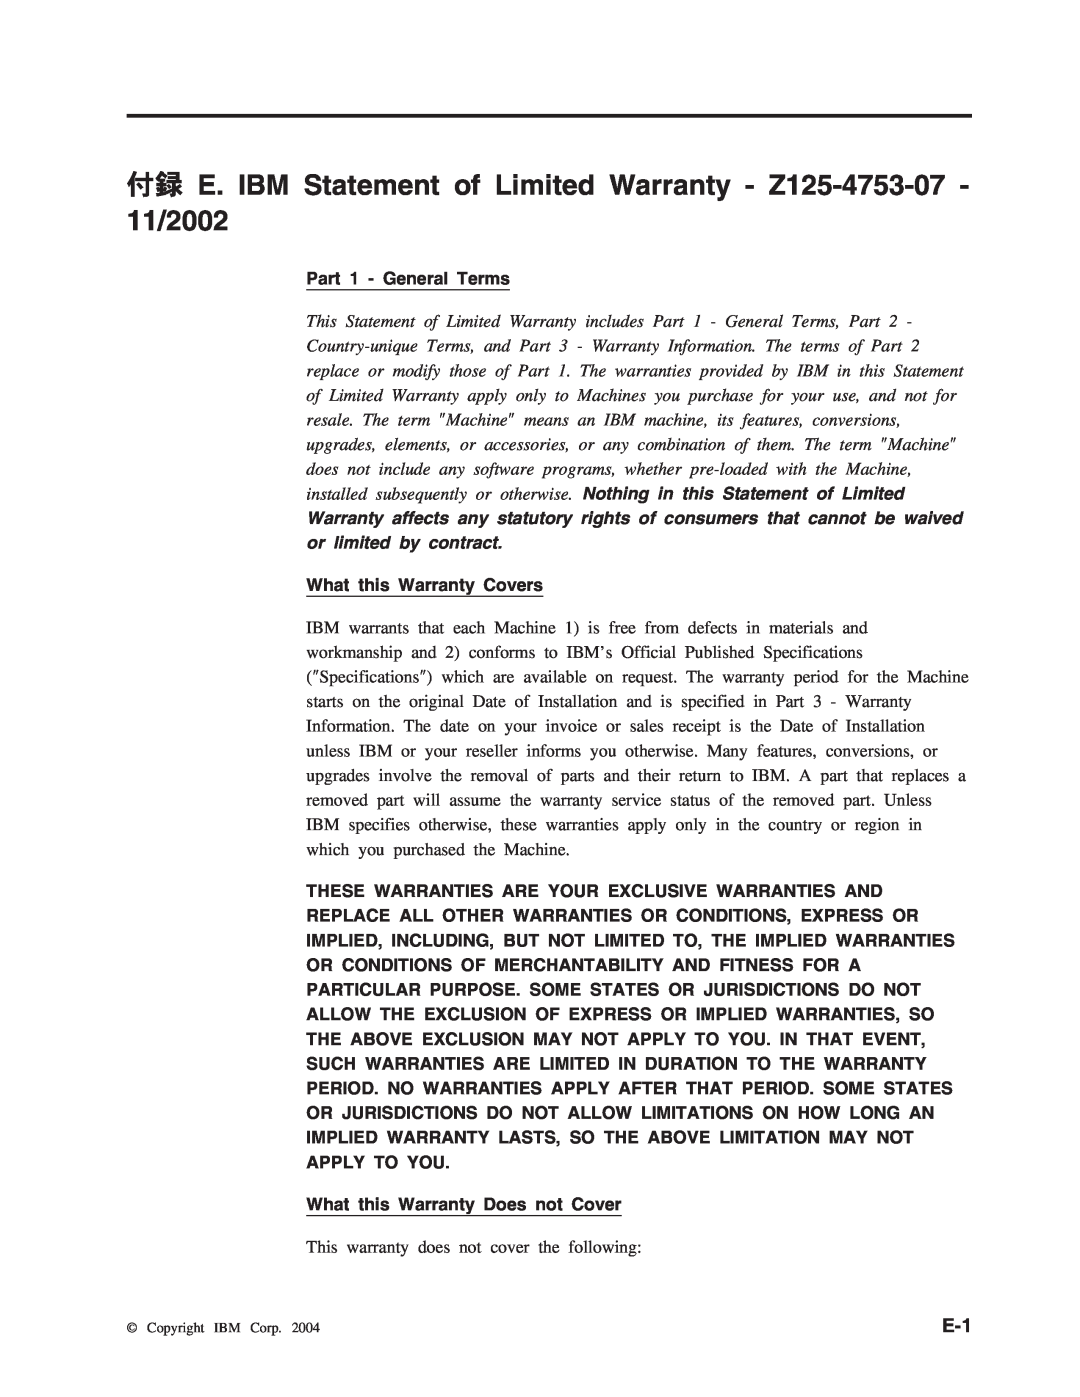 IBM M400 manual 付録 E. IBM Statement of Limited Warranty - Z125-4753-07 - 11/2002, Part 1 - General Terms 